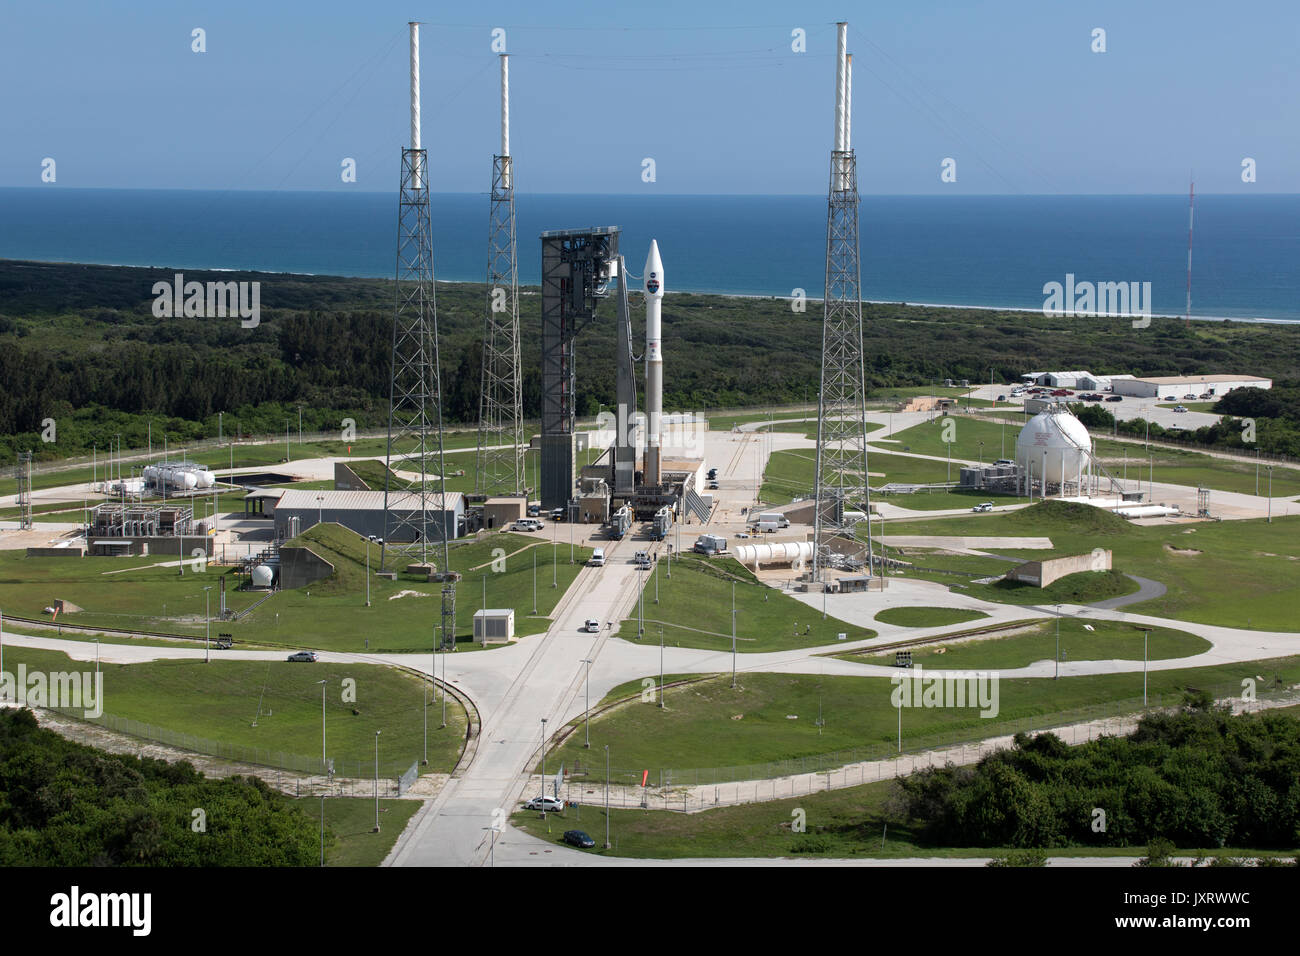 Cape Canaveral, United States Of America. 16th Aug, 2017. The United Launch Alliance Atlas V rocket stands at Space Launch Complex 41 at Cape Canaveral Air Force Station August 16, 2017 in Cape Canaveral, Florida. The commercial rocket scheduled to send NASA's Tracking and Data Relay Satellite, TDRS-M to orbit on August 18th. Credit: Planetpix/Alamy Live News Stock Photo